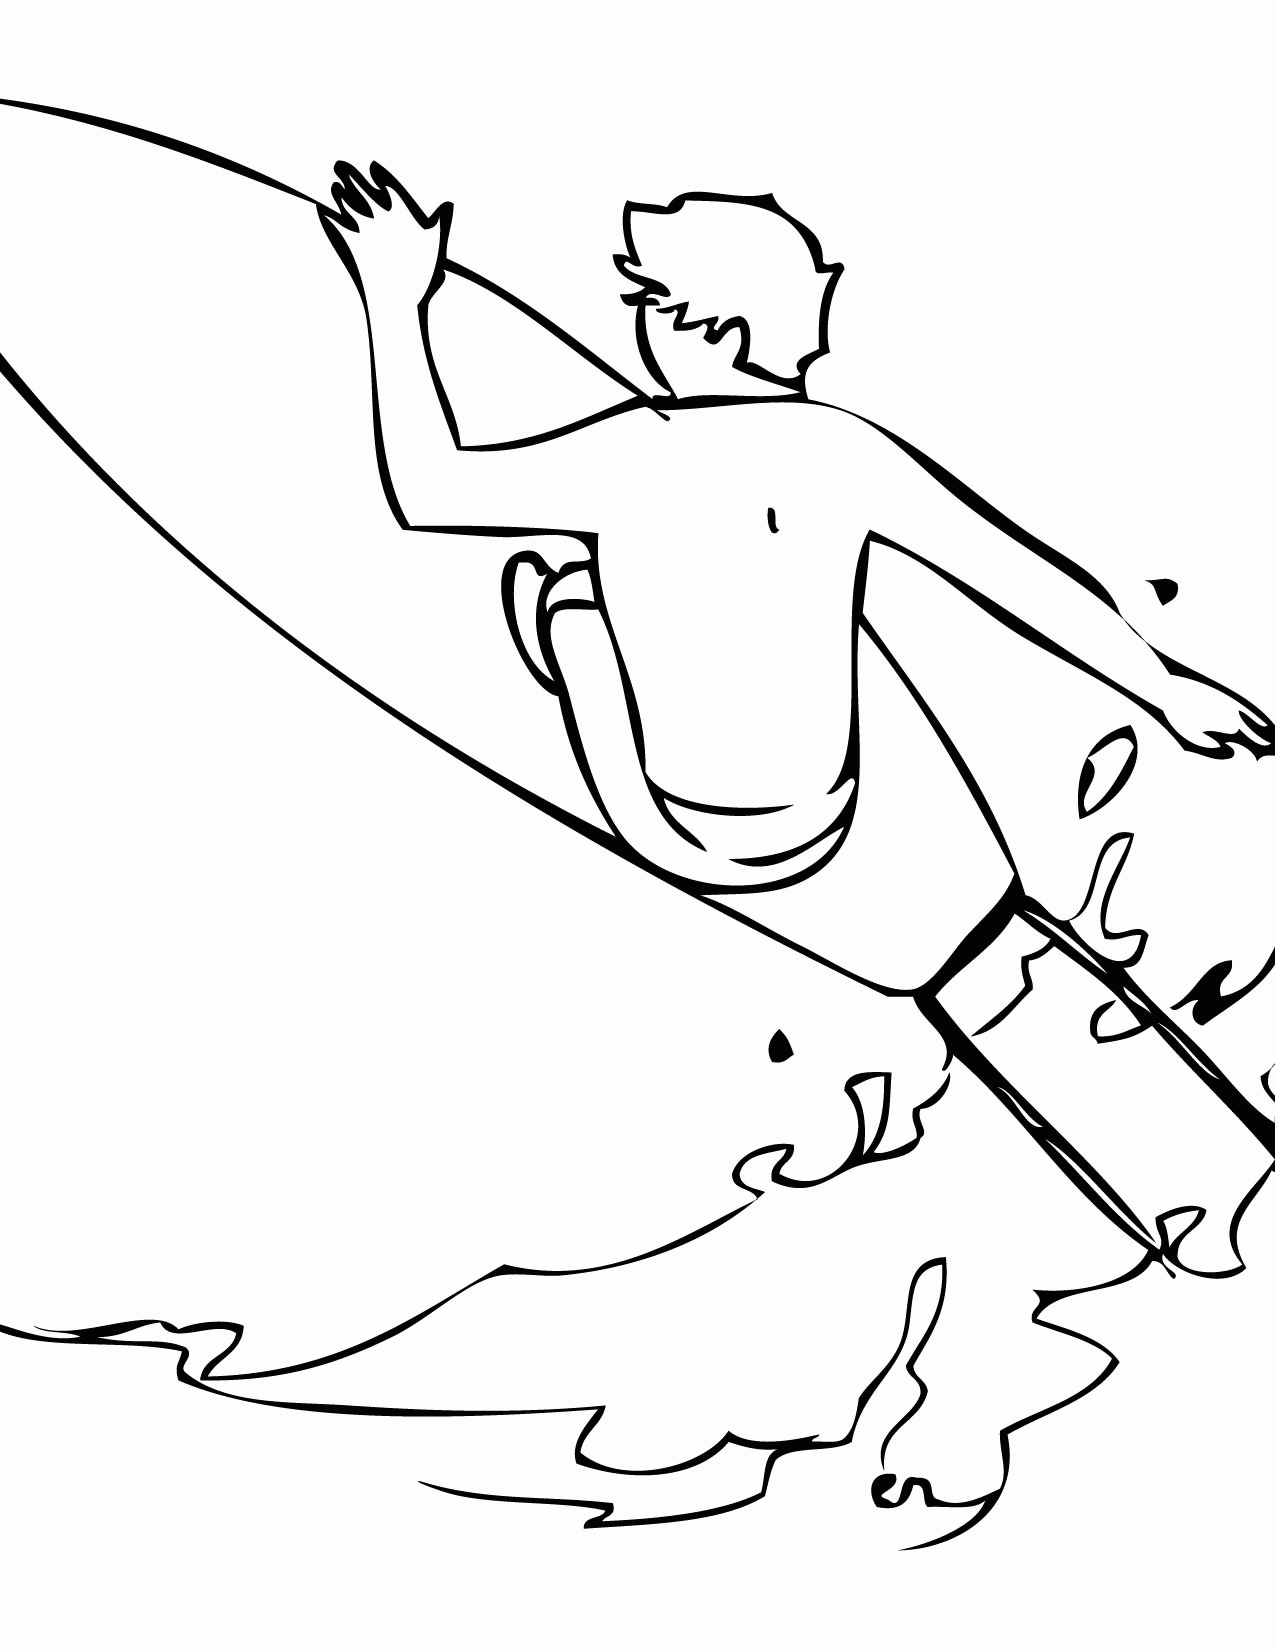 Surfing Coloring Page - Handipoints